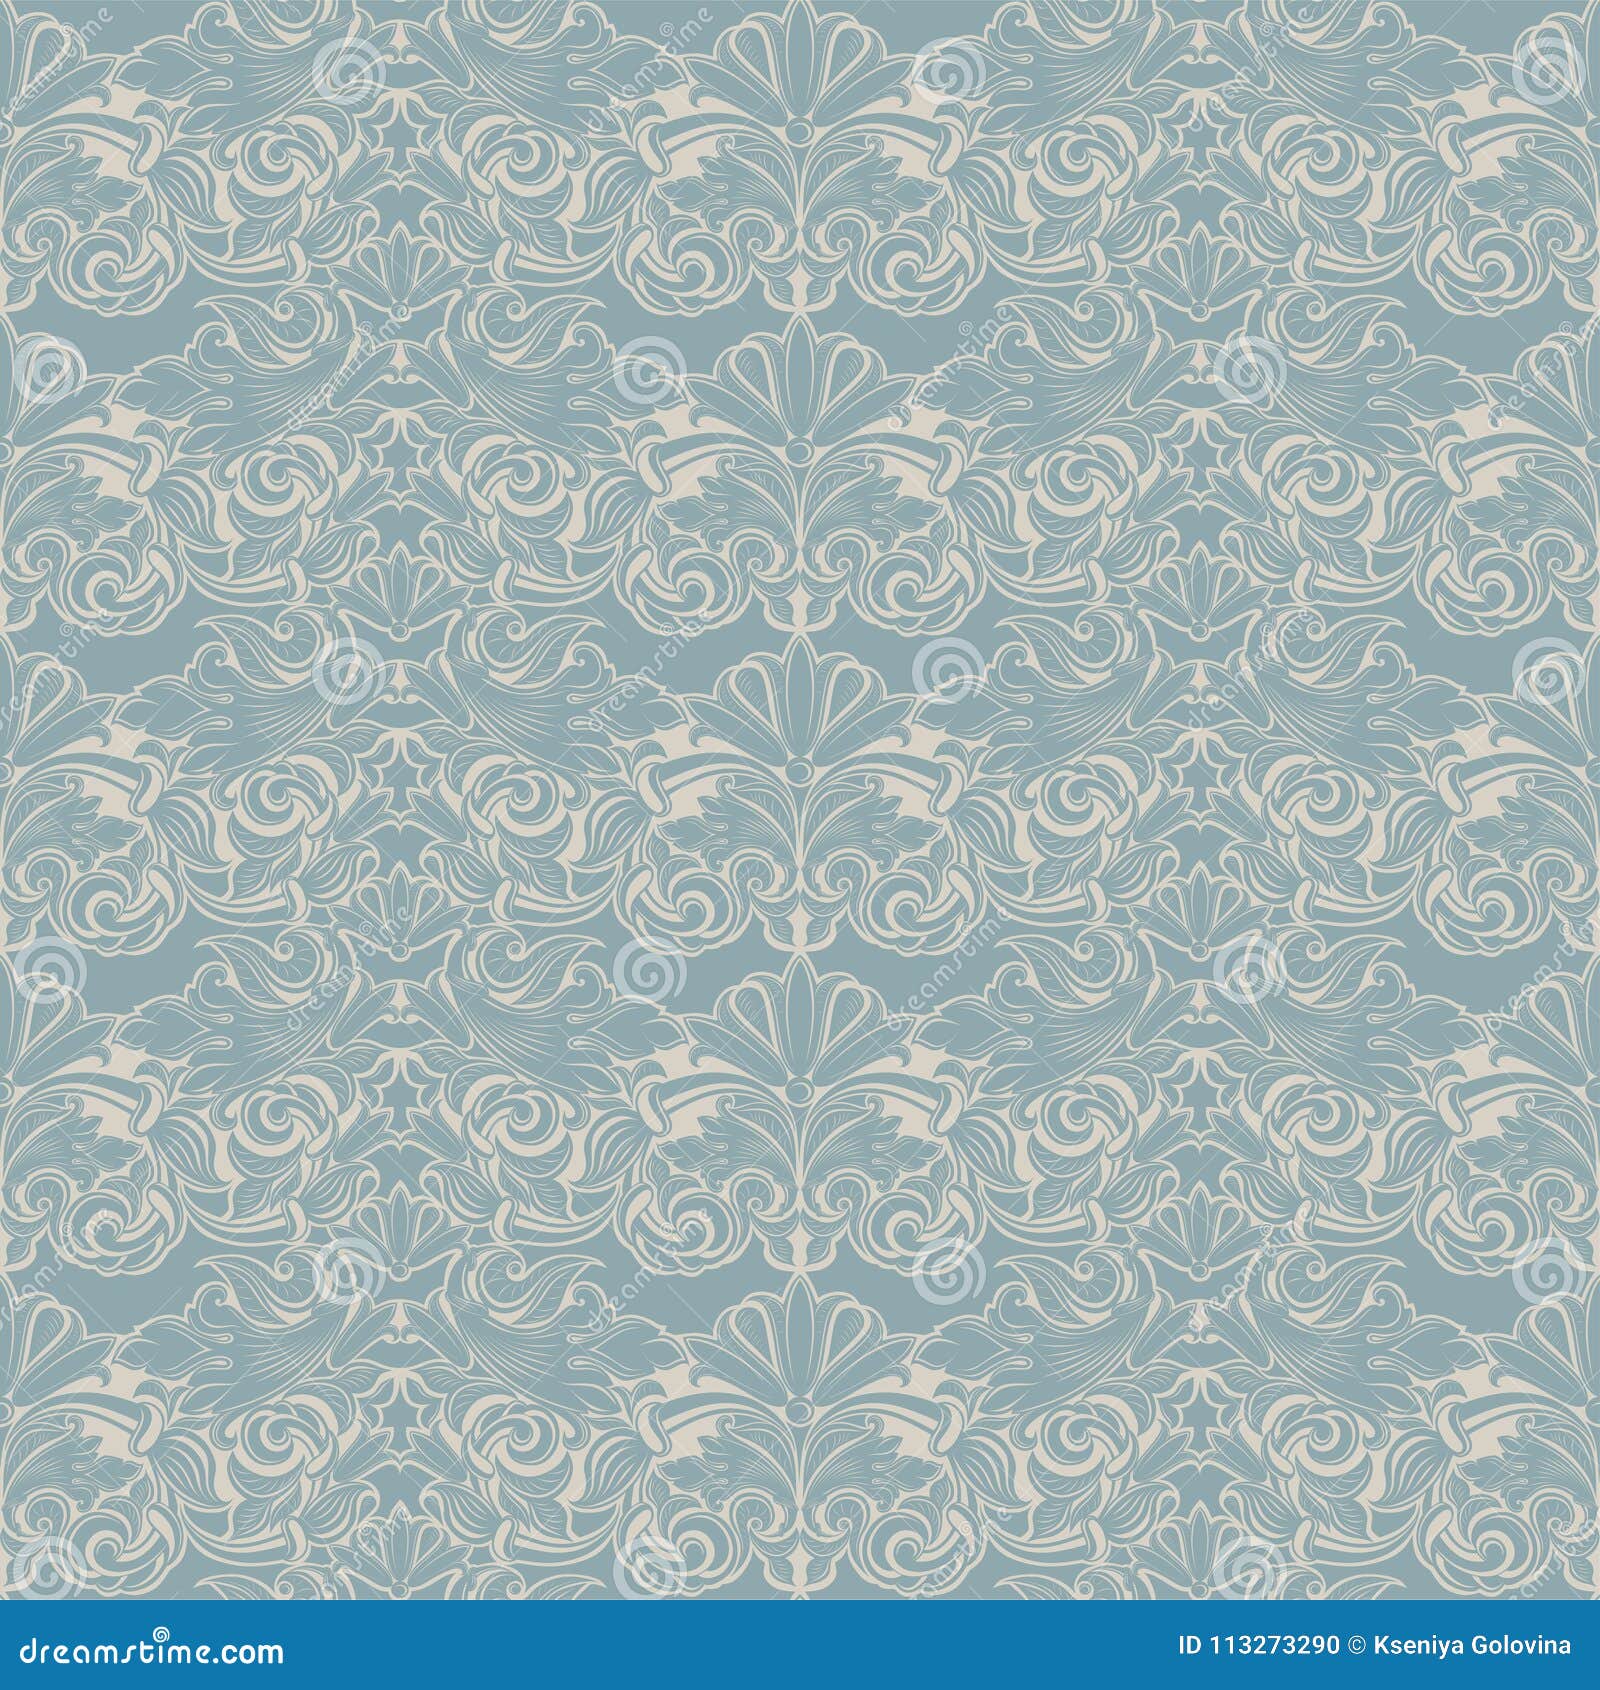 seamless baroque pattern in light blue and white